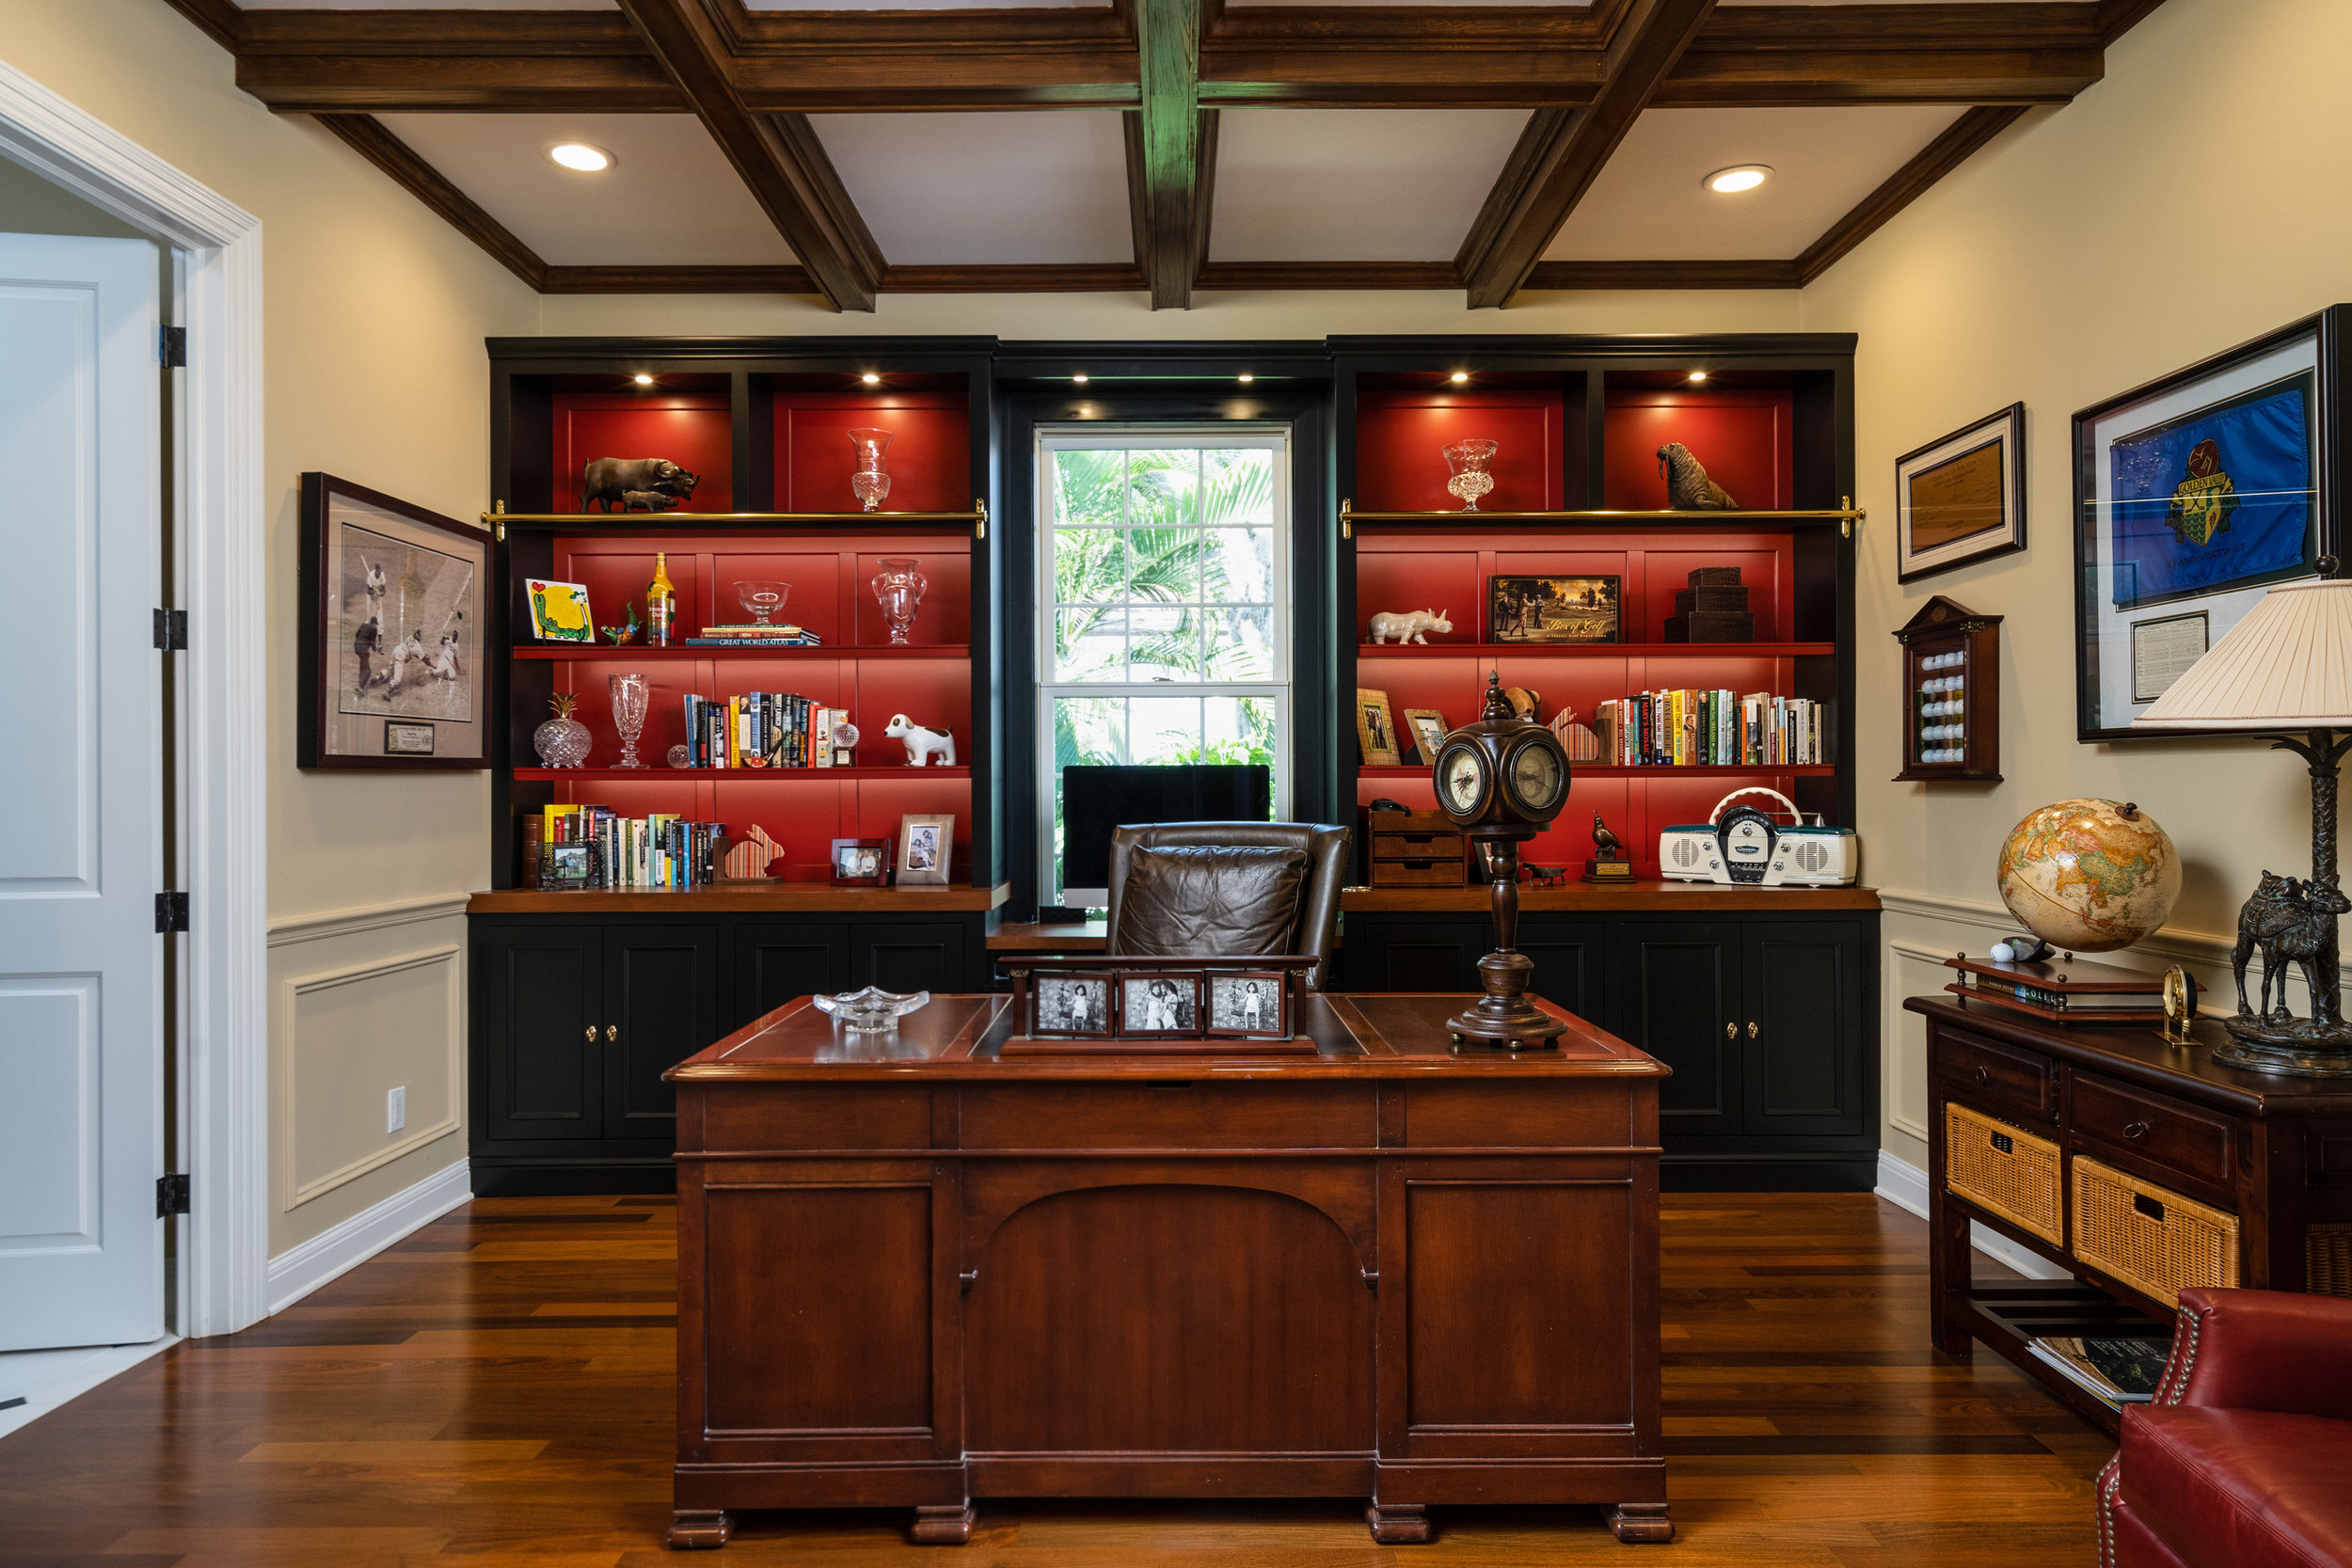 Beautiful home office with exposed beam coffered ceilings and built-in shelves